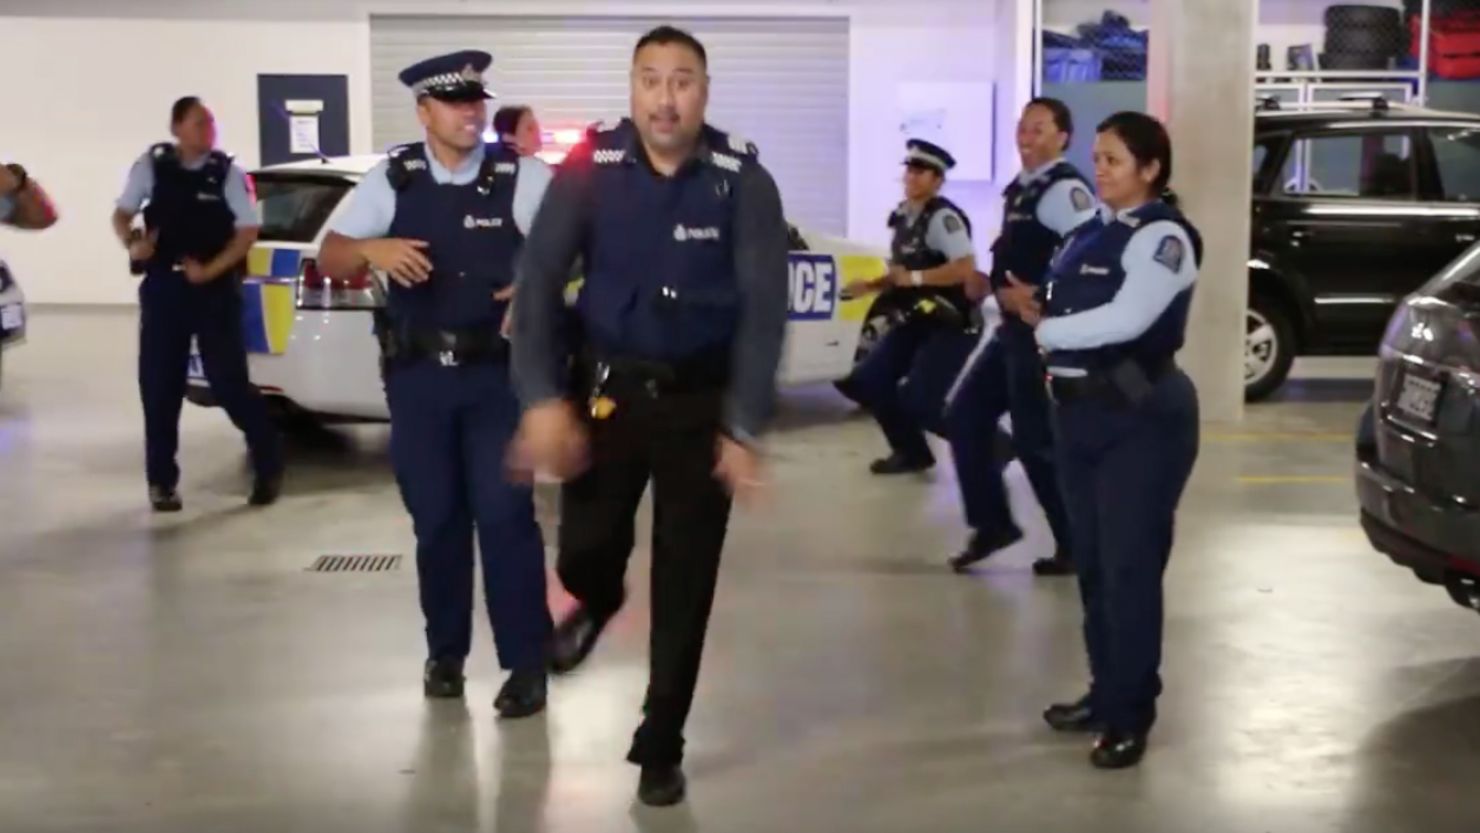 New Zealand police officers work it in a viral clip responding to the #runningmanchallenge.